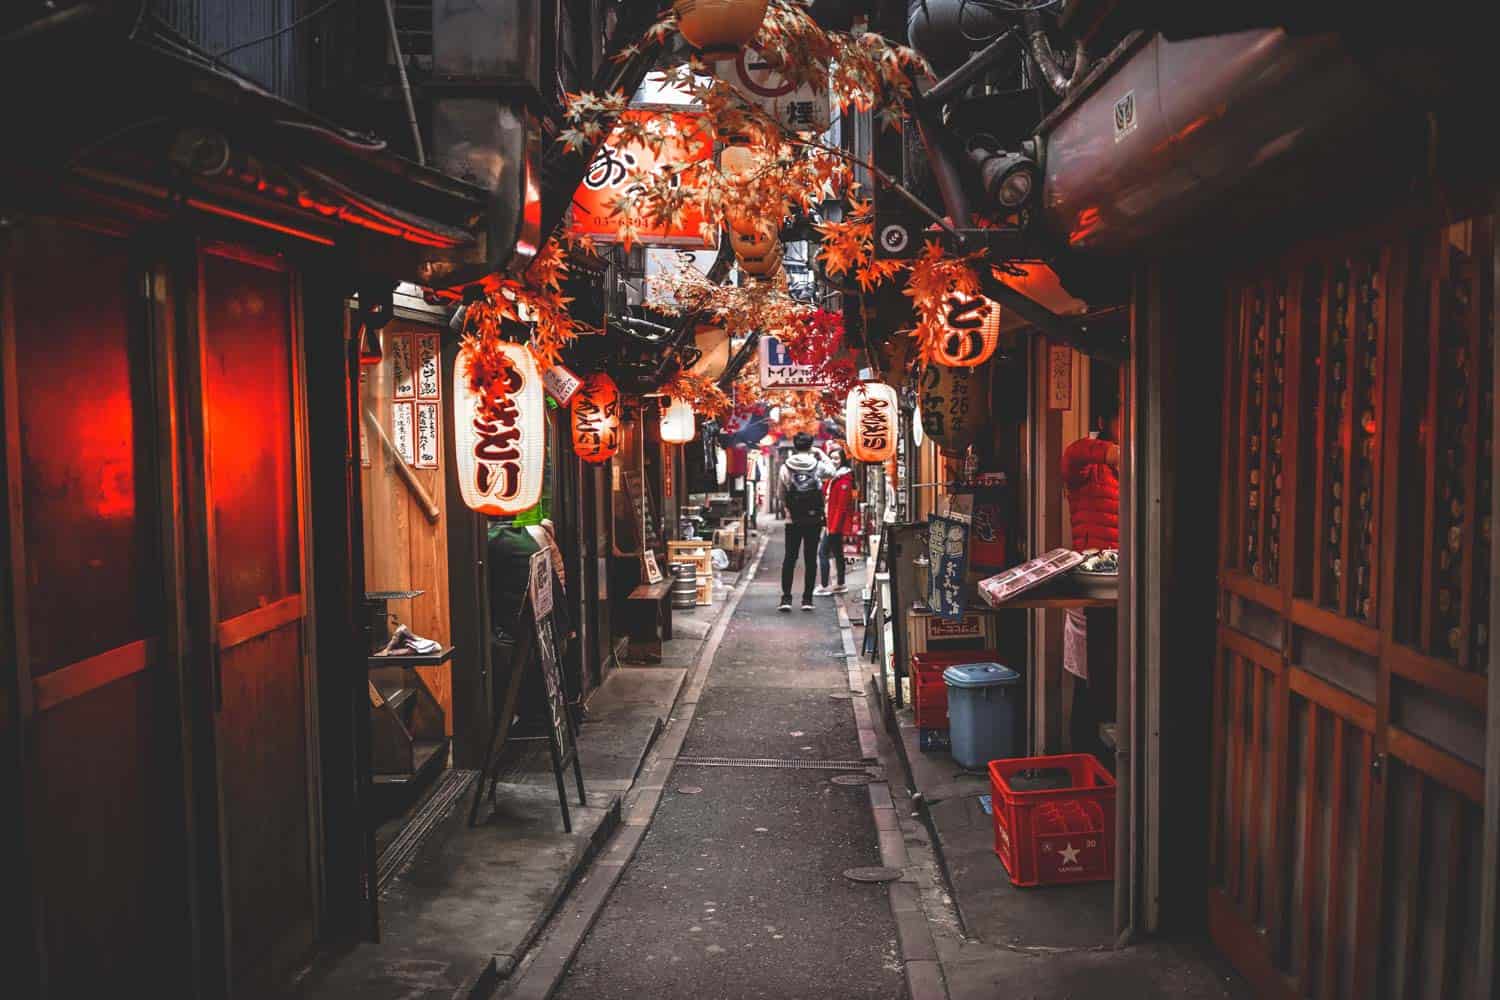 Most Instagrammable places in Tokyo, Japan - Tokyo photo locations